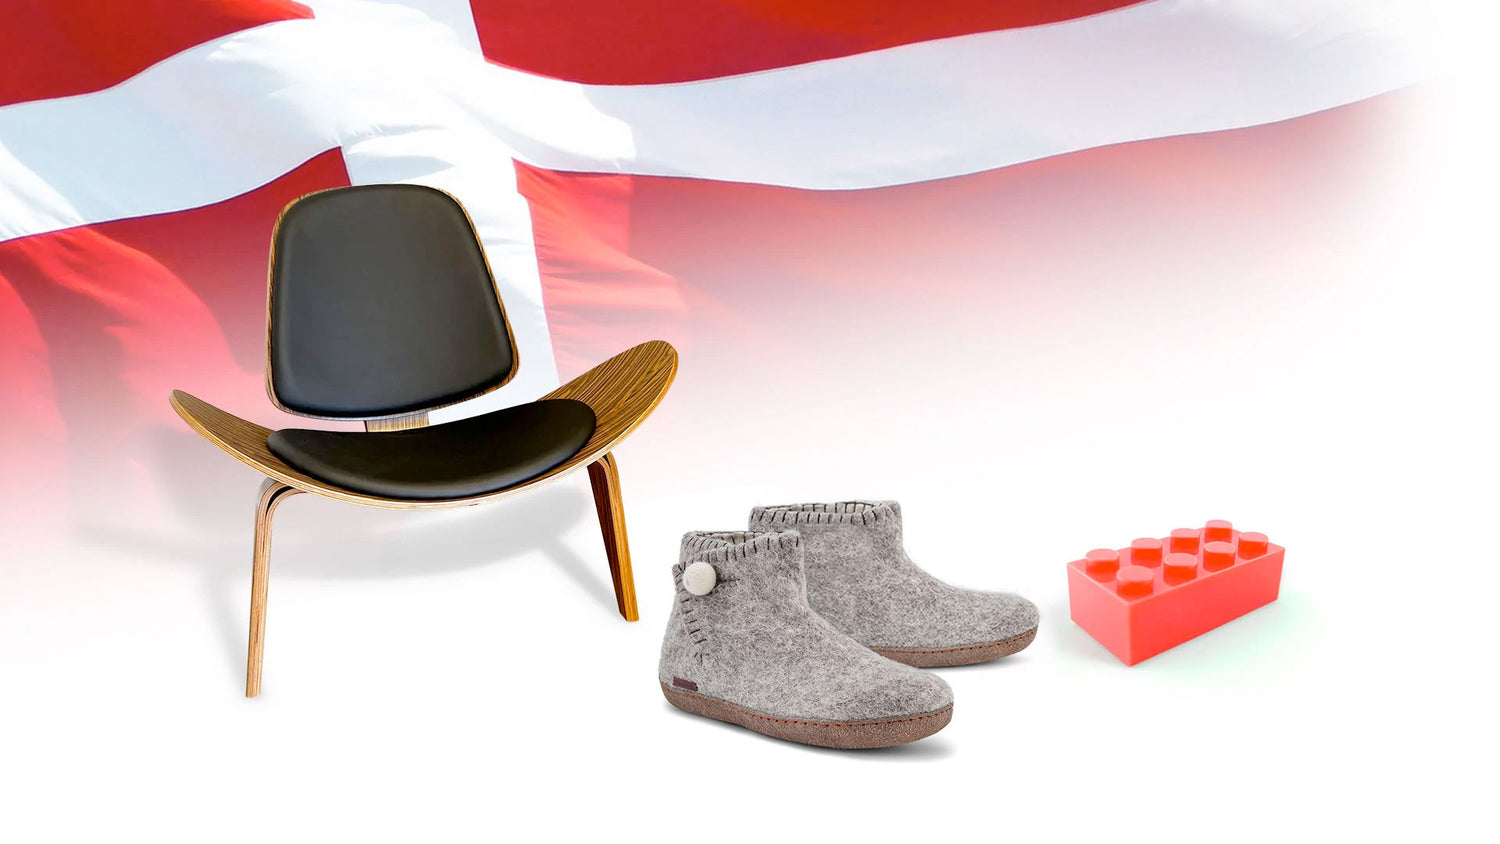 A Collage Containing The Flag Of Denmark, The Hans Wenger Shell Chair, A Brick Of Lego, And A Pair Of Grey Betterfelt Daisy Slippers With Leather Soles